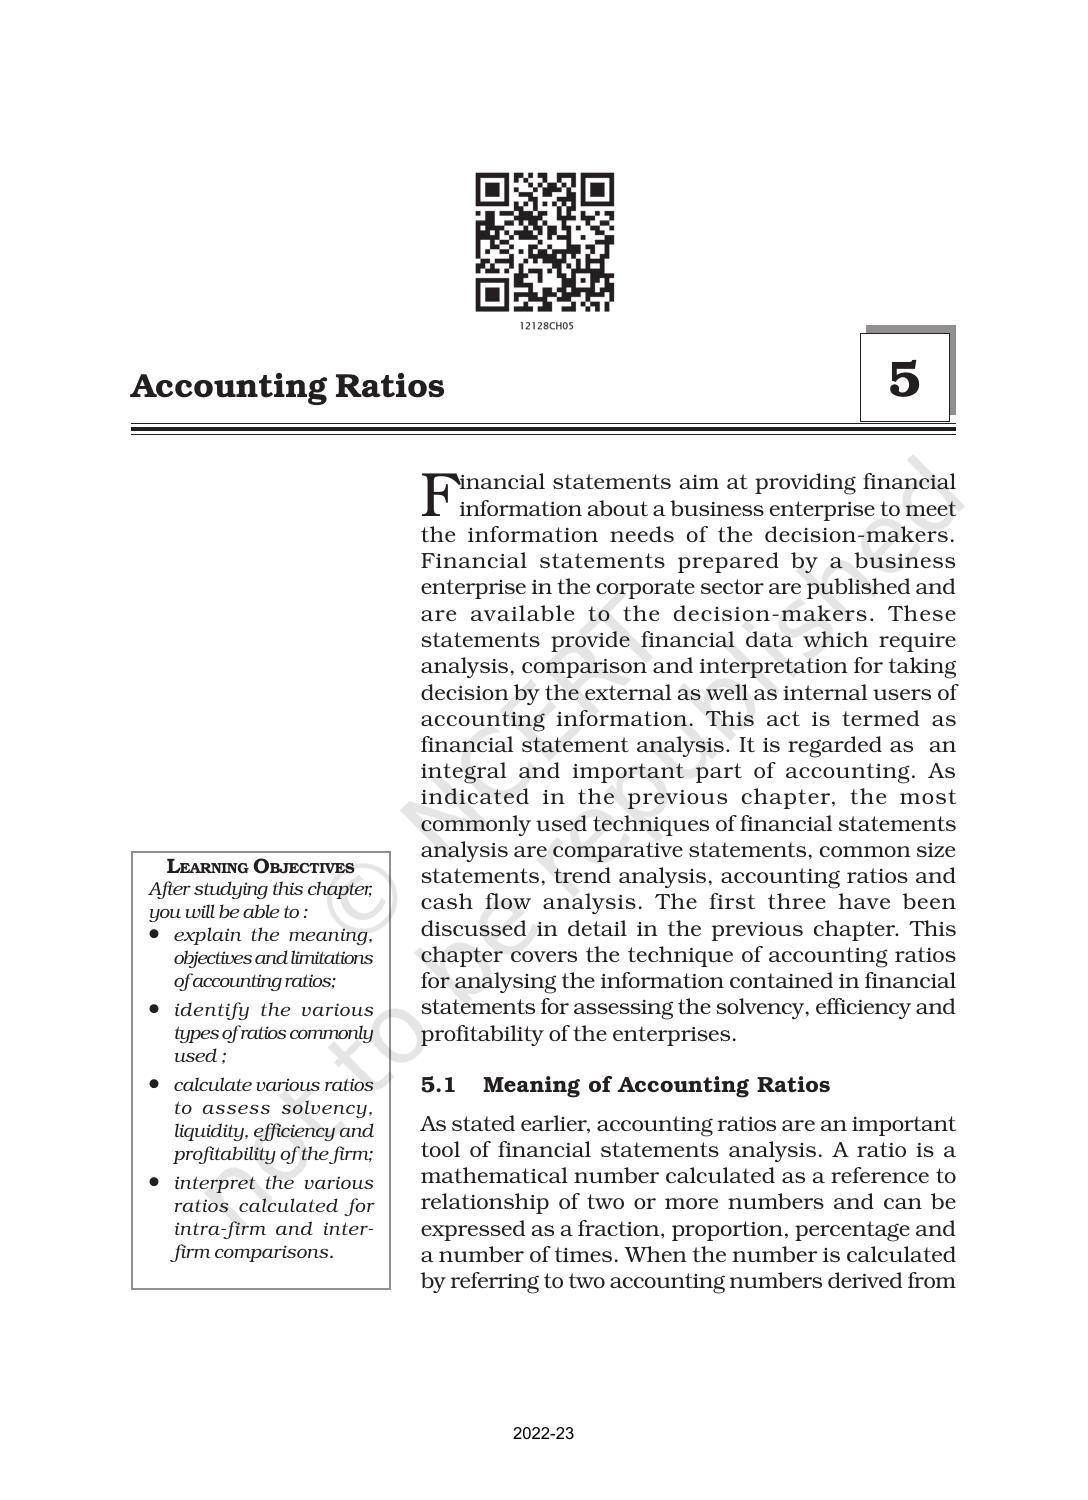 NCERT Book for Class 12 Accountancy Part II Chapter 5 Accounting Ratios - Page 1